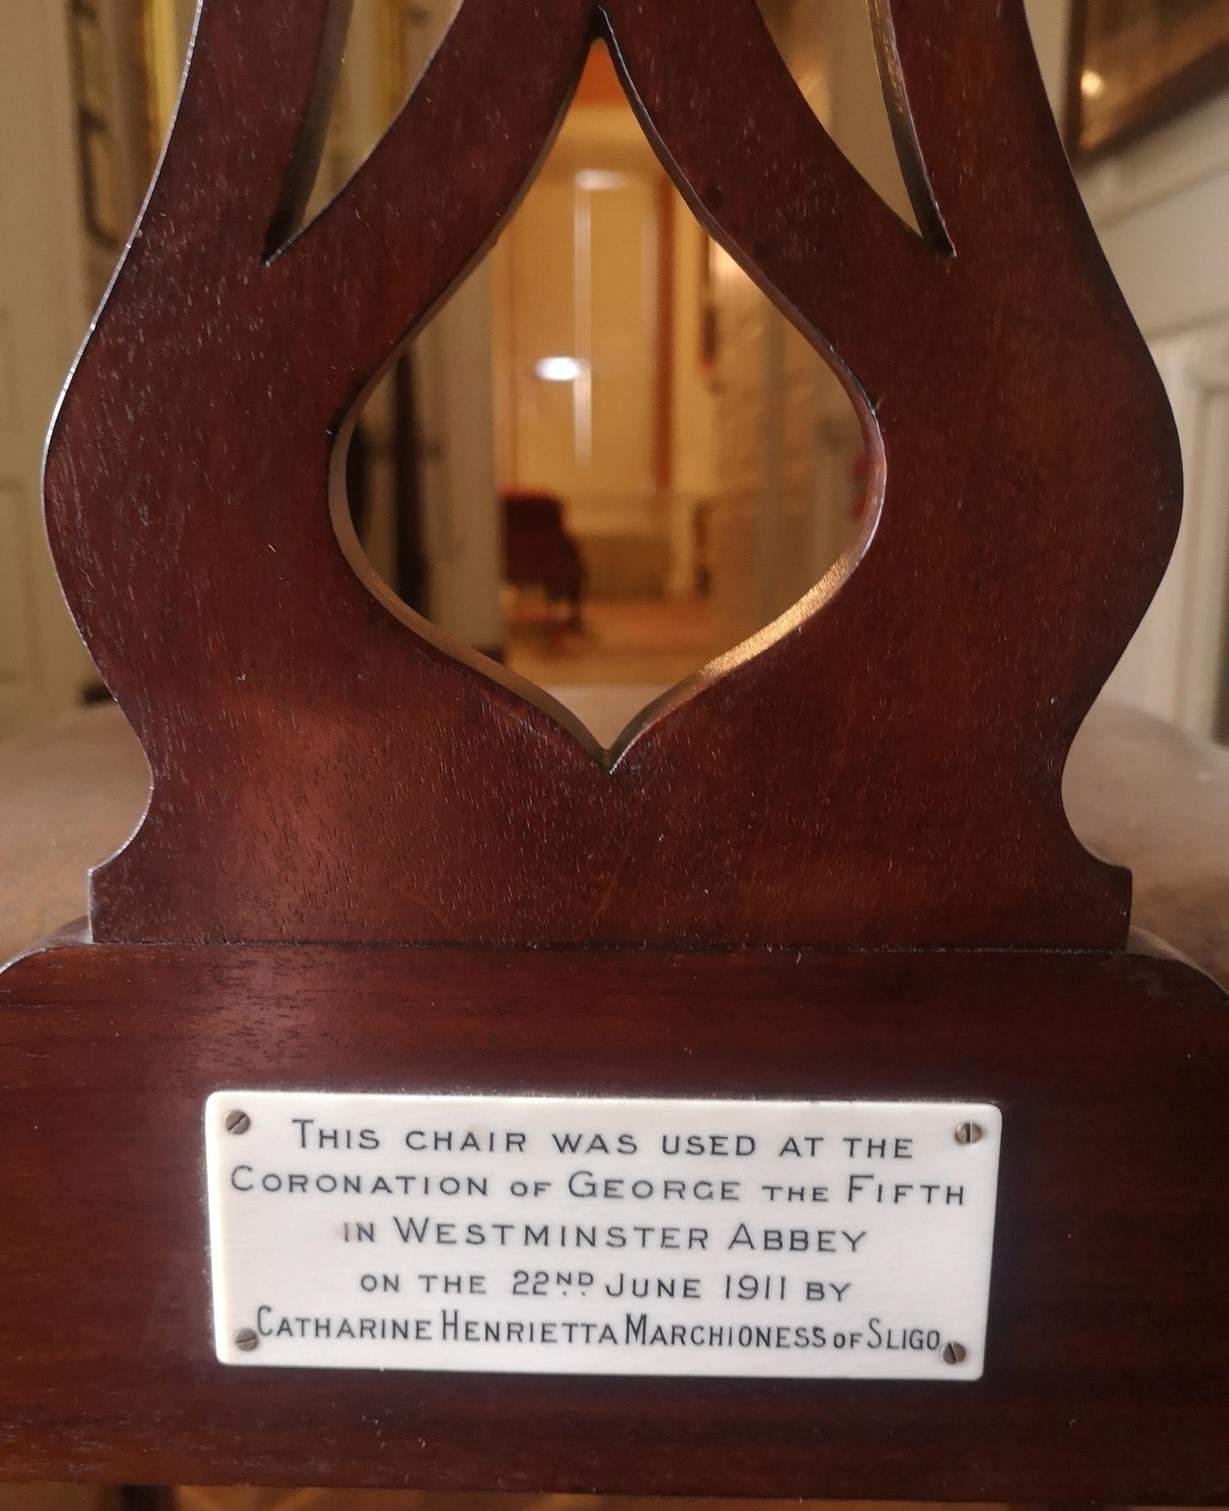 Chair inscription as follows: This chair was used at the Coronation of George the Fifth in Westminster Abbey on the 22nd June 1911 by Catharine Henrietta, Marchioness of Sligo. On display in Westport House